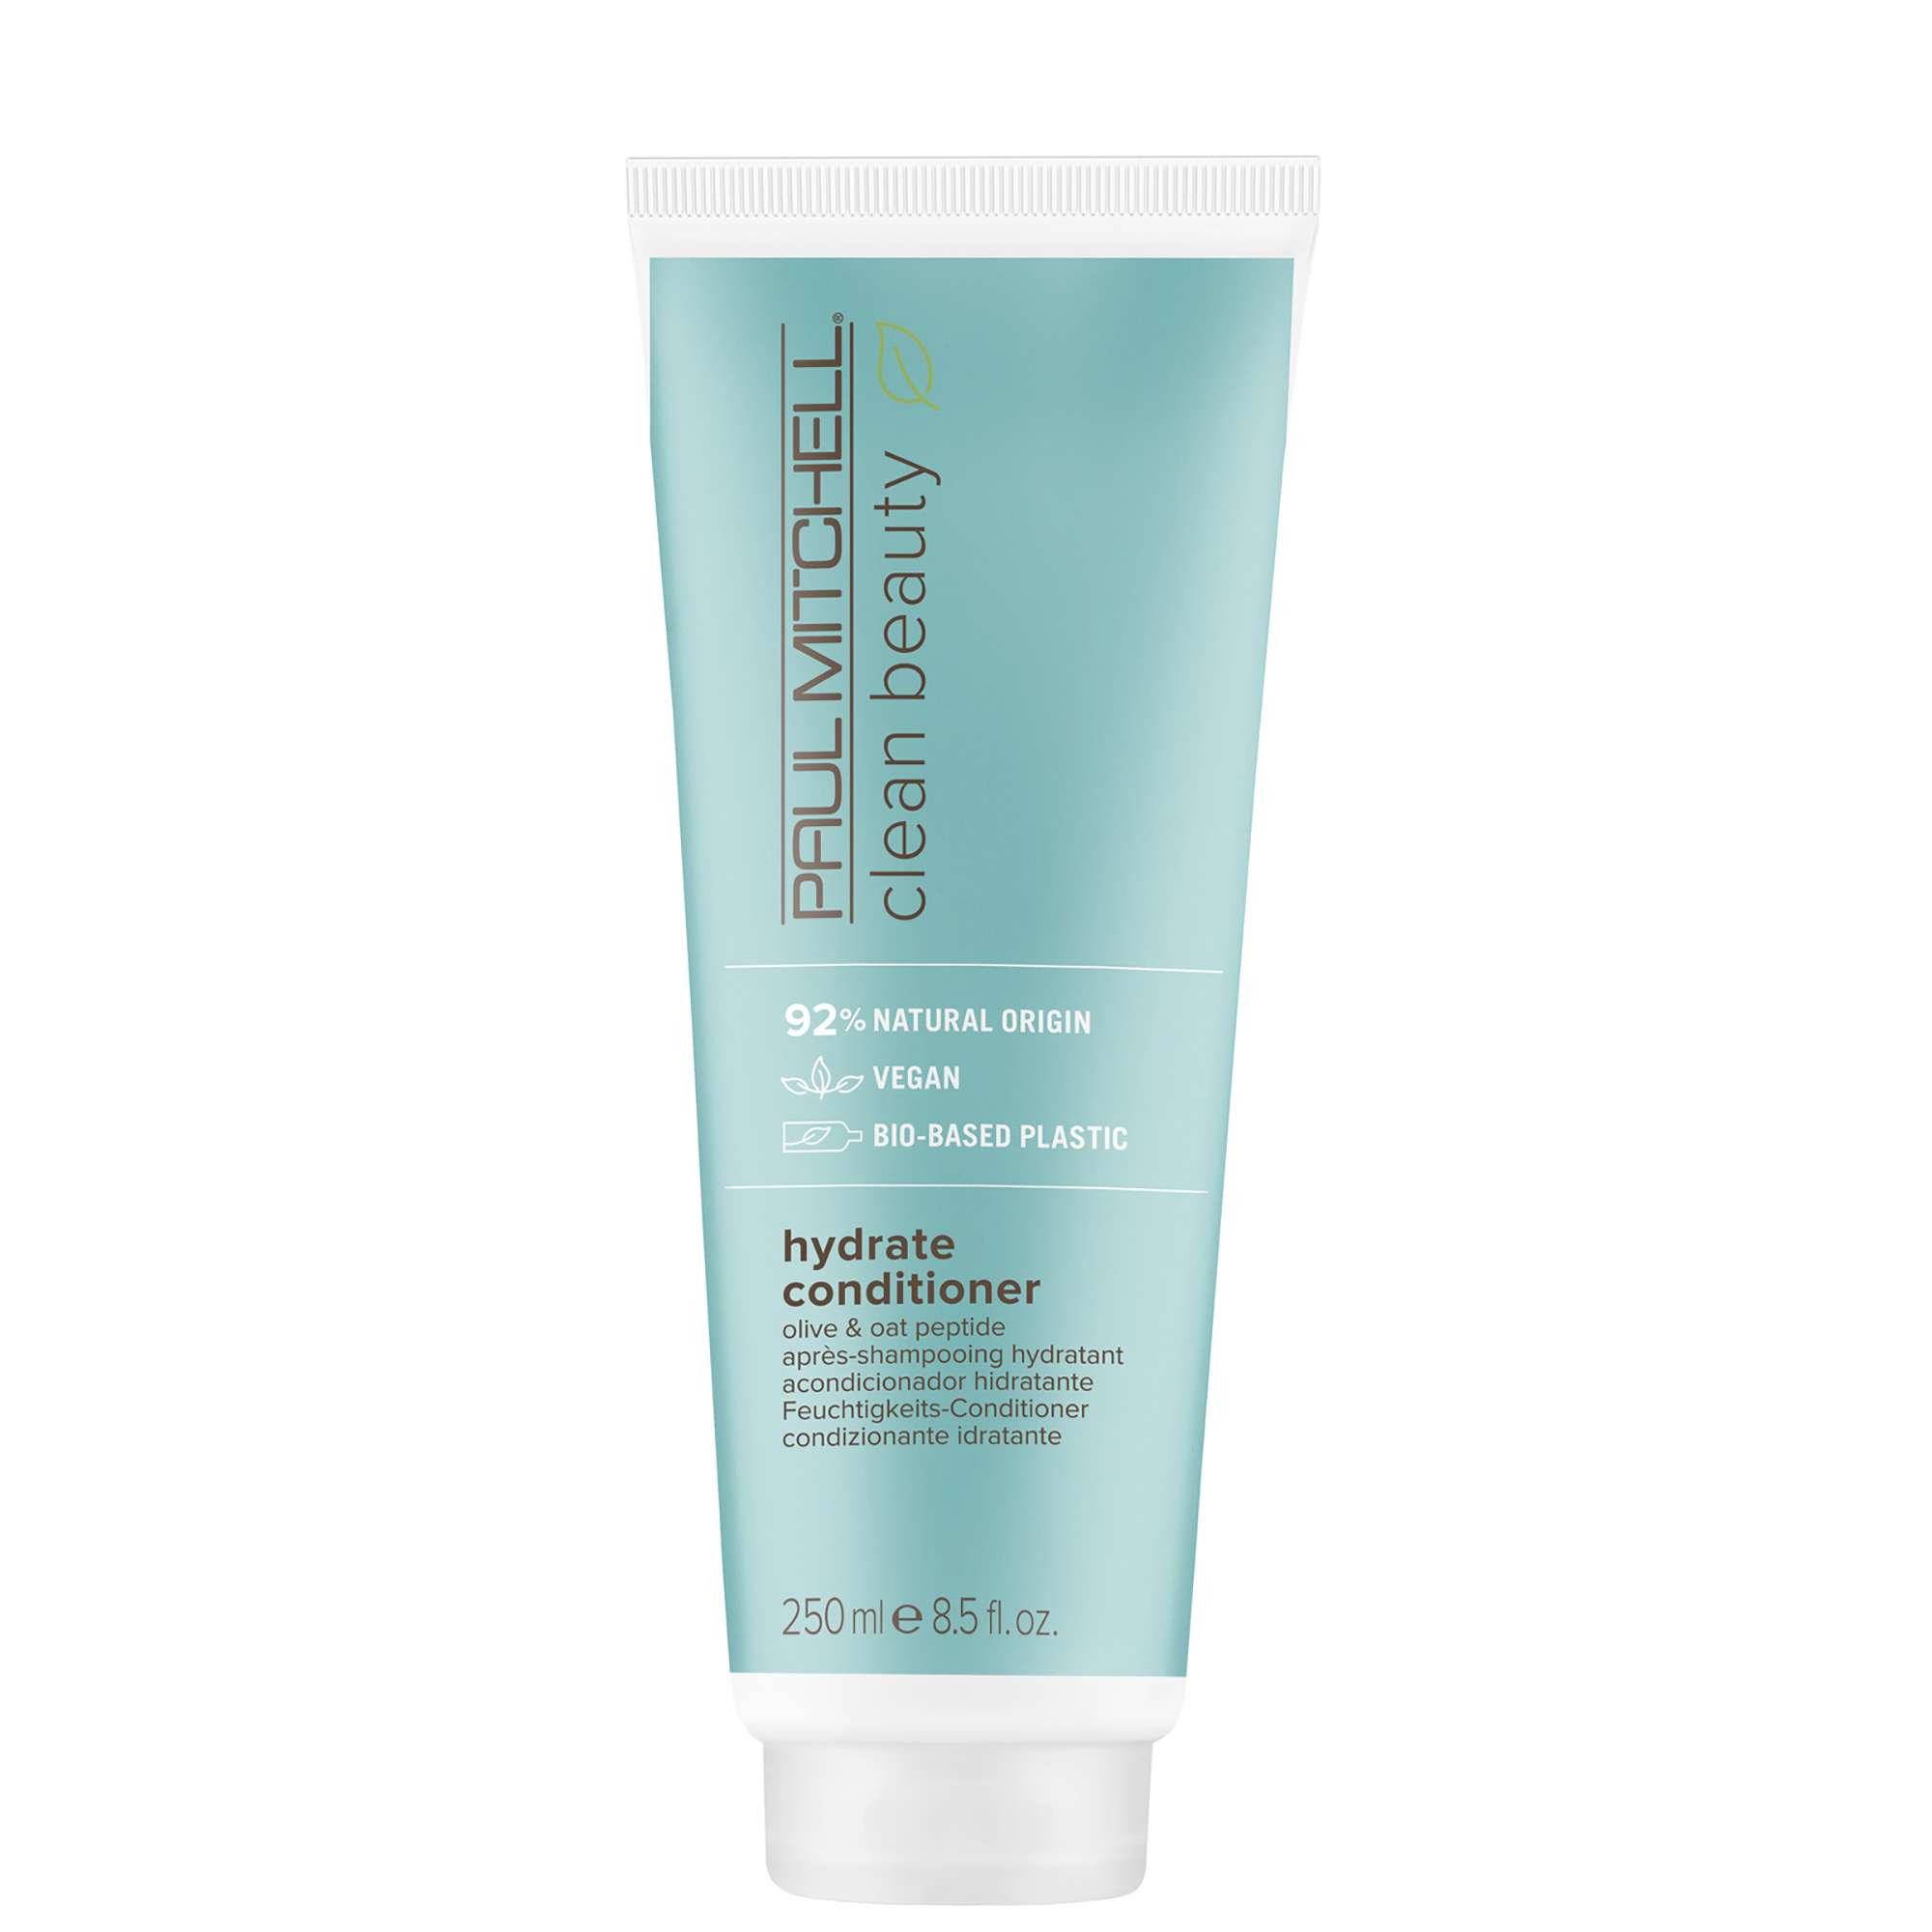 Image of Paul Mitchell Clean Beauty Hydrate Conditioner 250ml